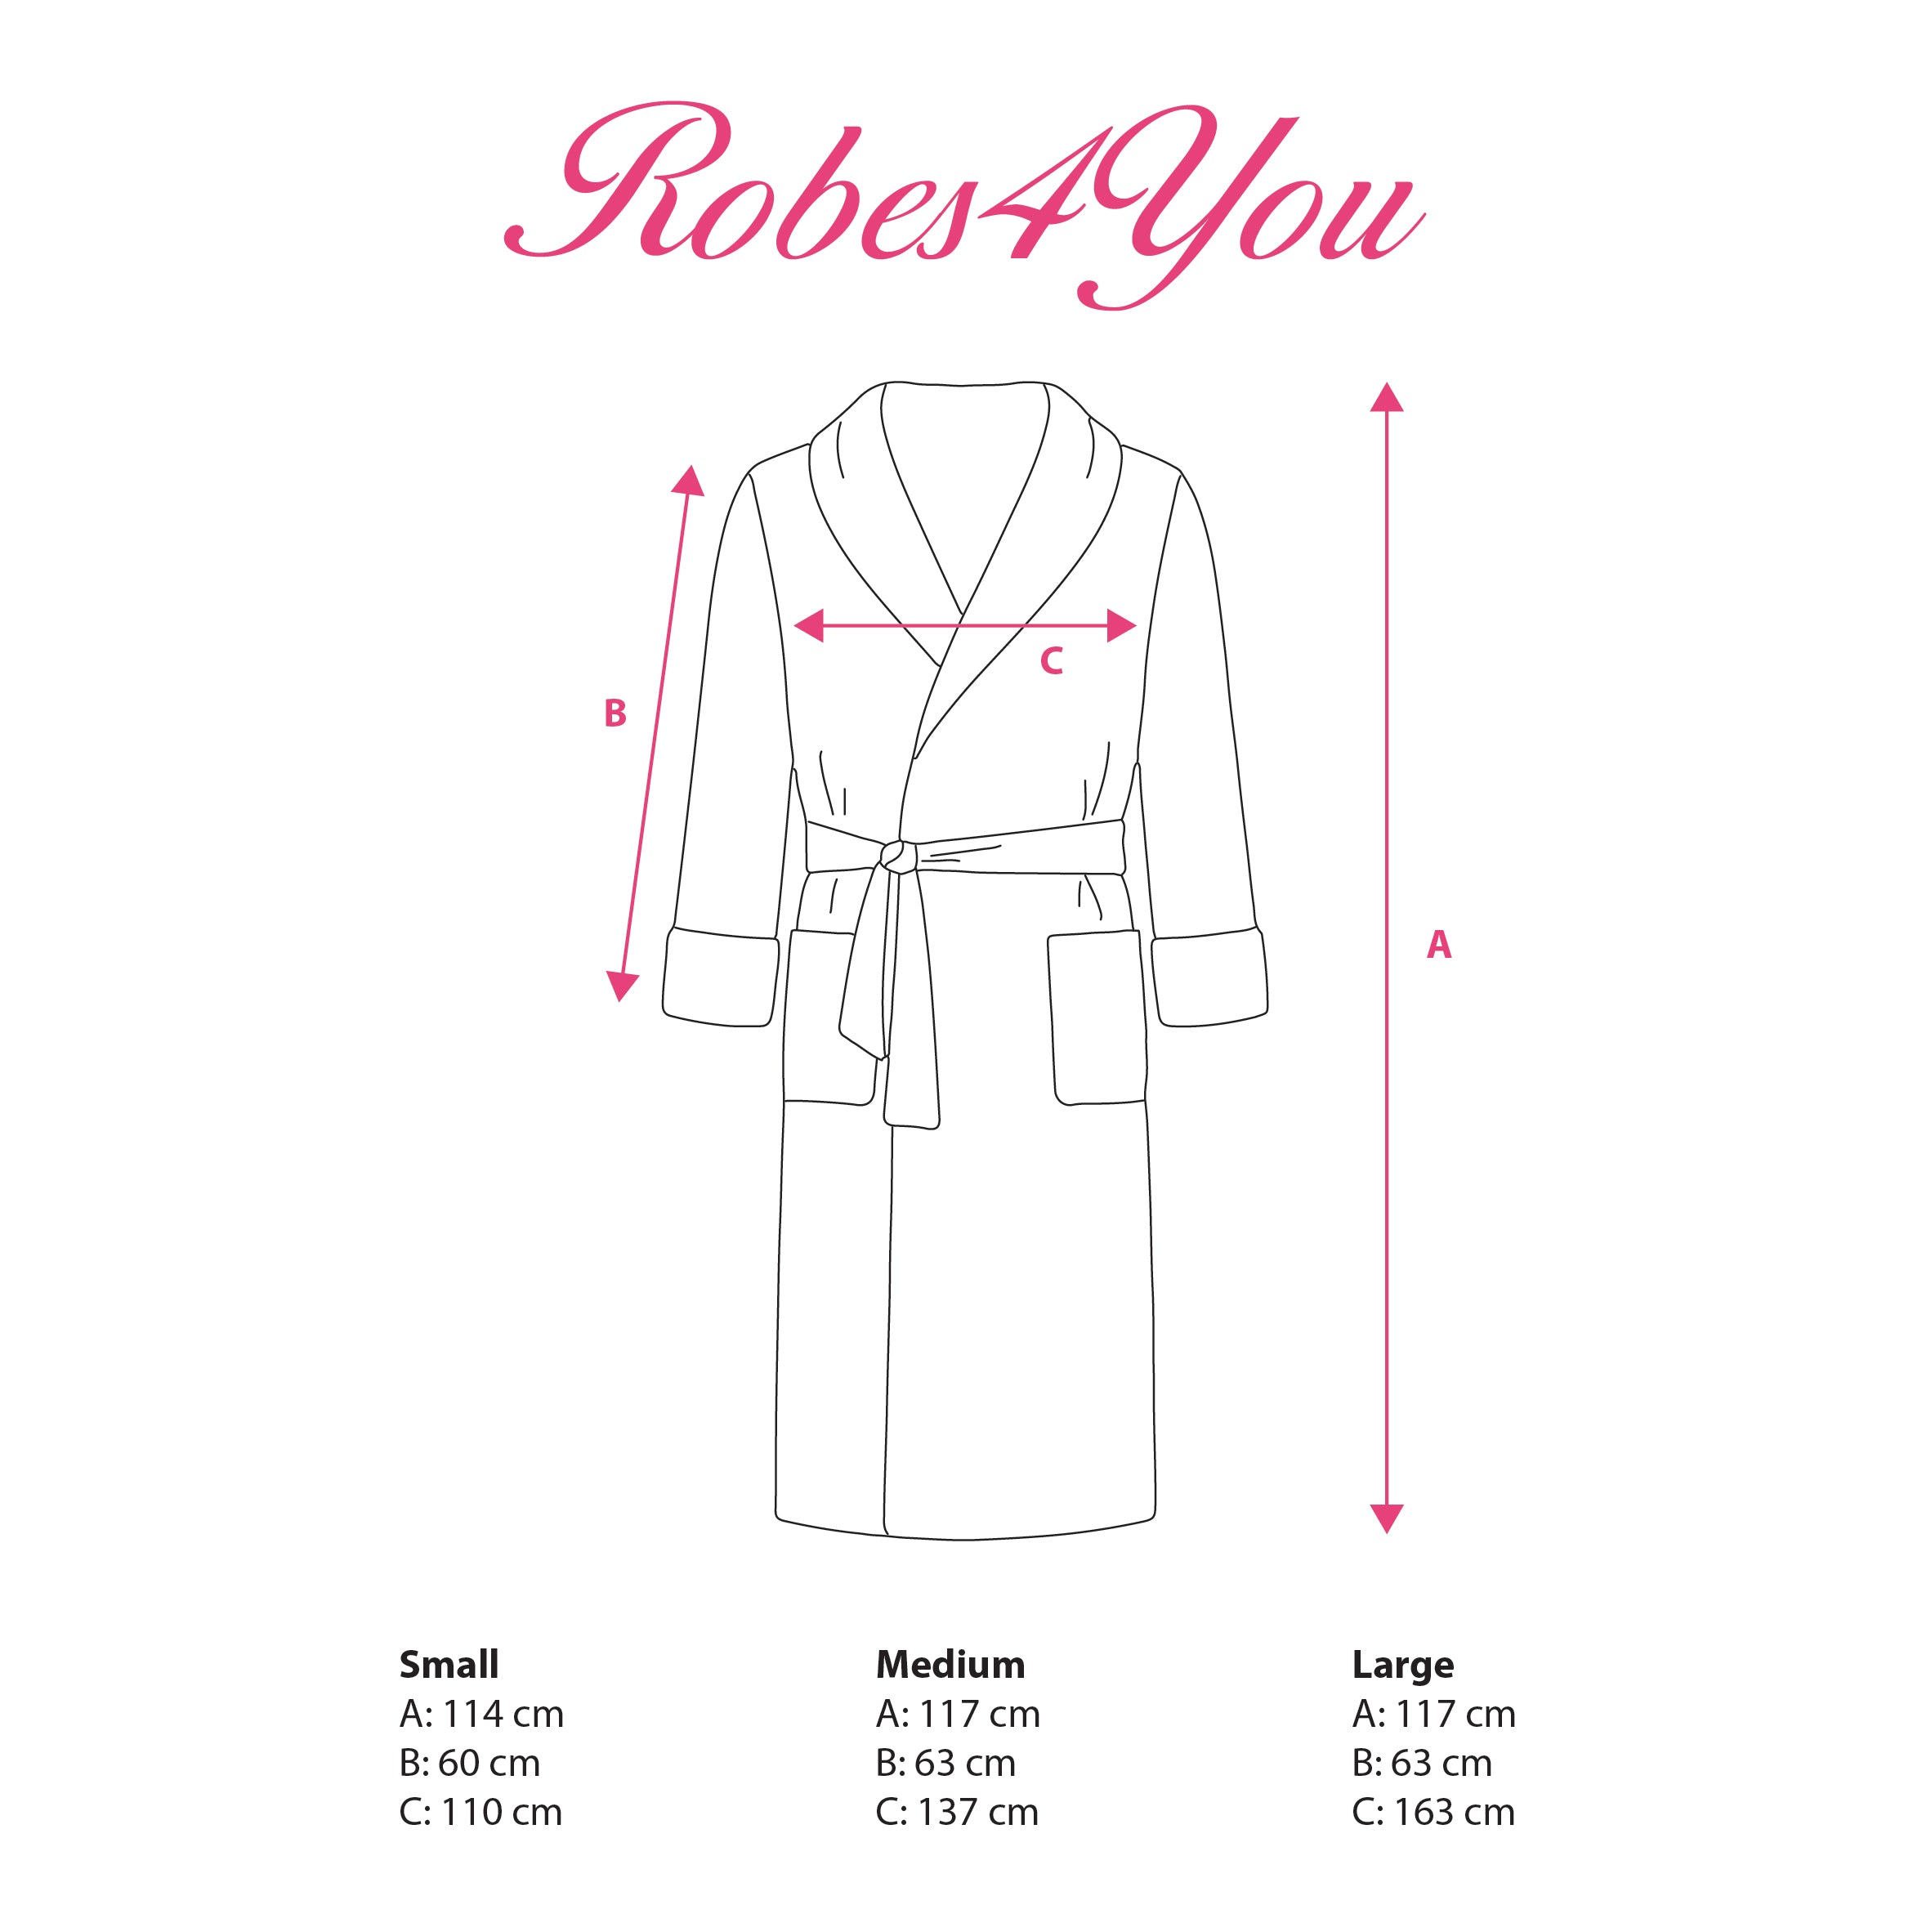 Adults robe measurements -robes4you